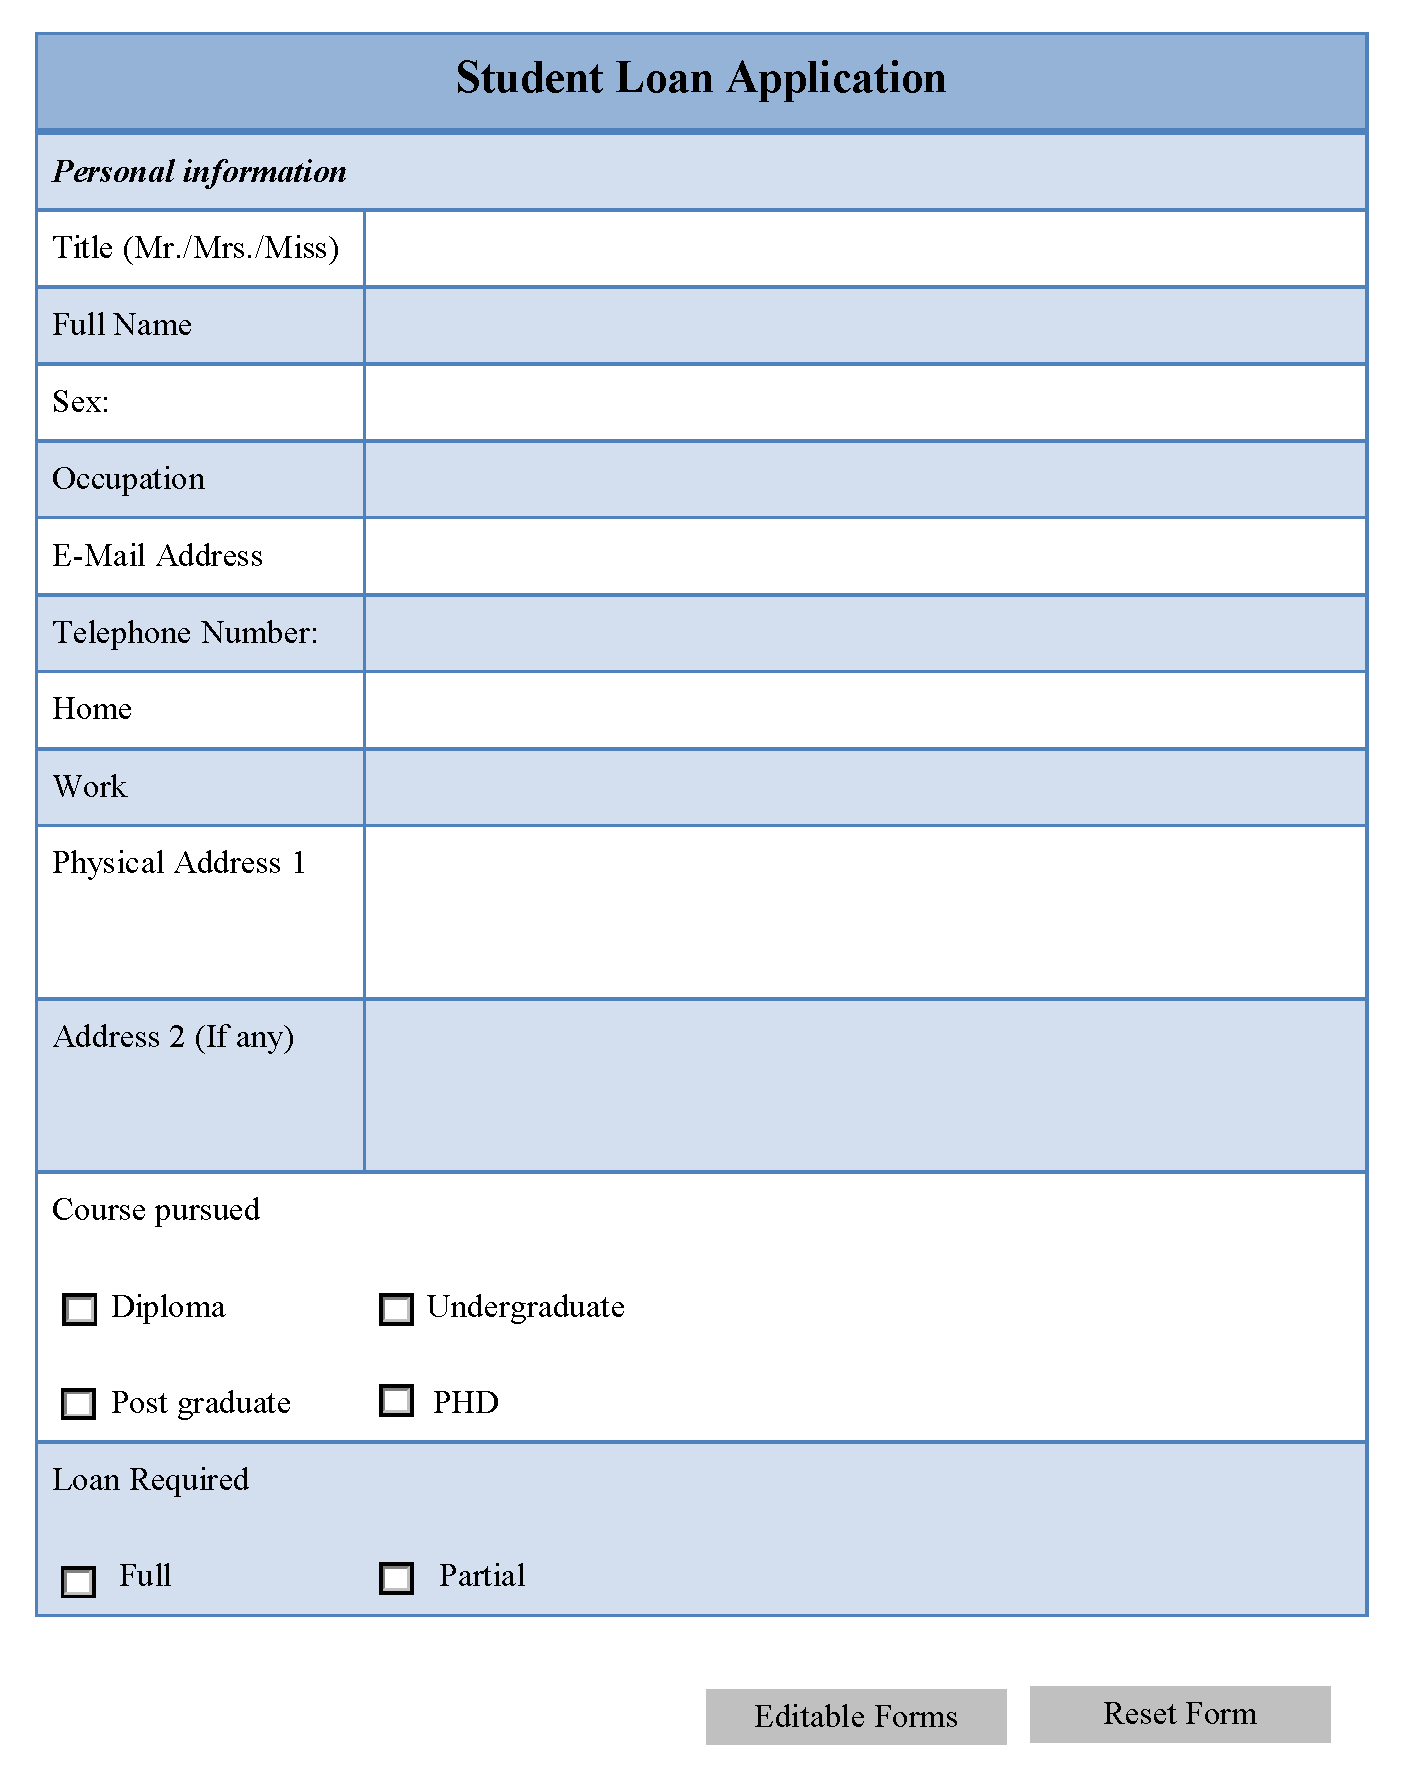 Student Loan Application Form | Editable Forms